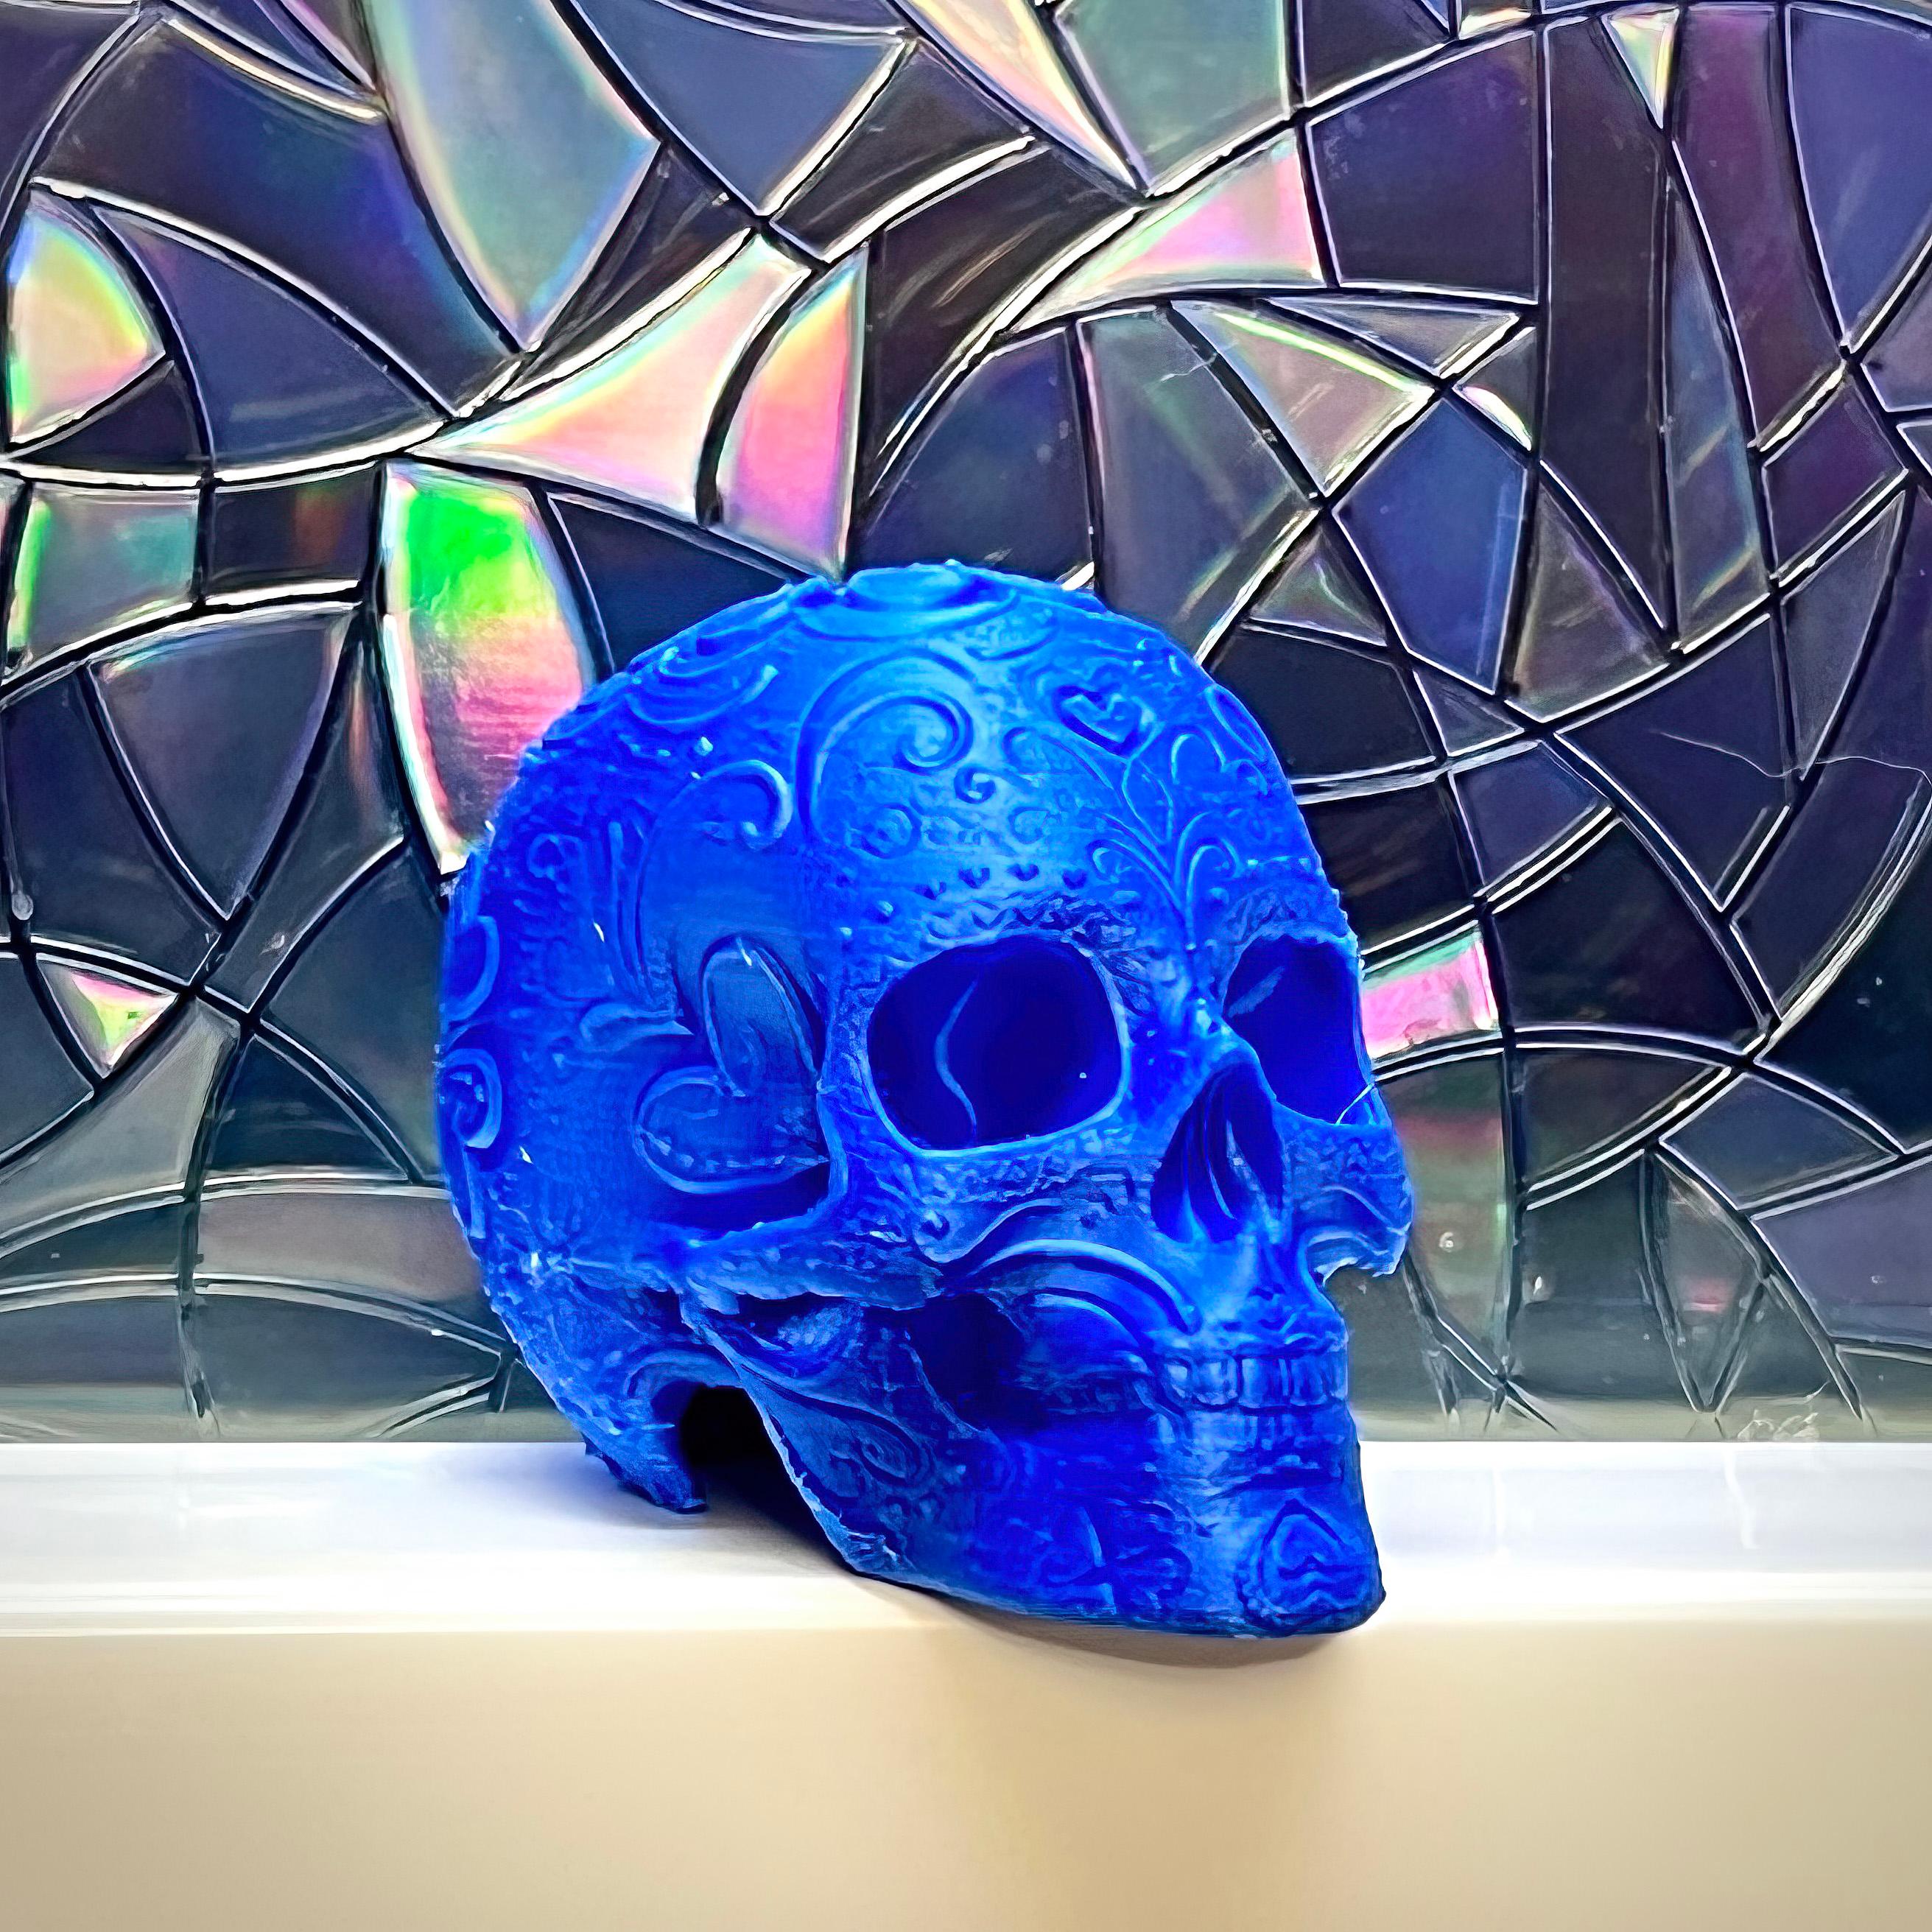 Valentine Sugar Skull - Scaled to 30%. Came out awesome! - 3d model